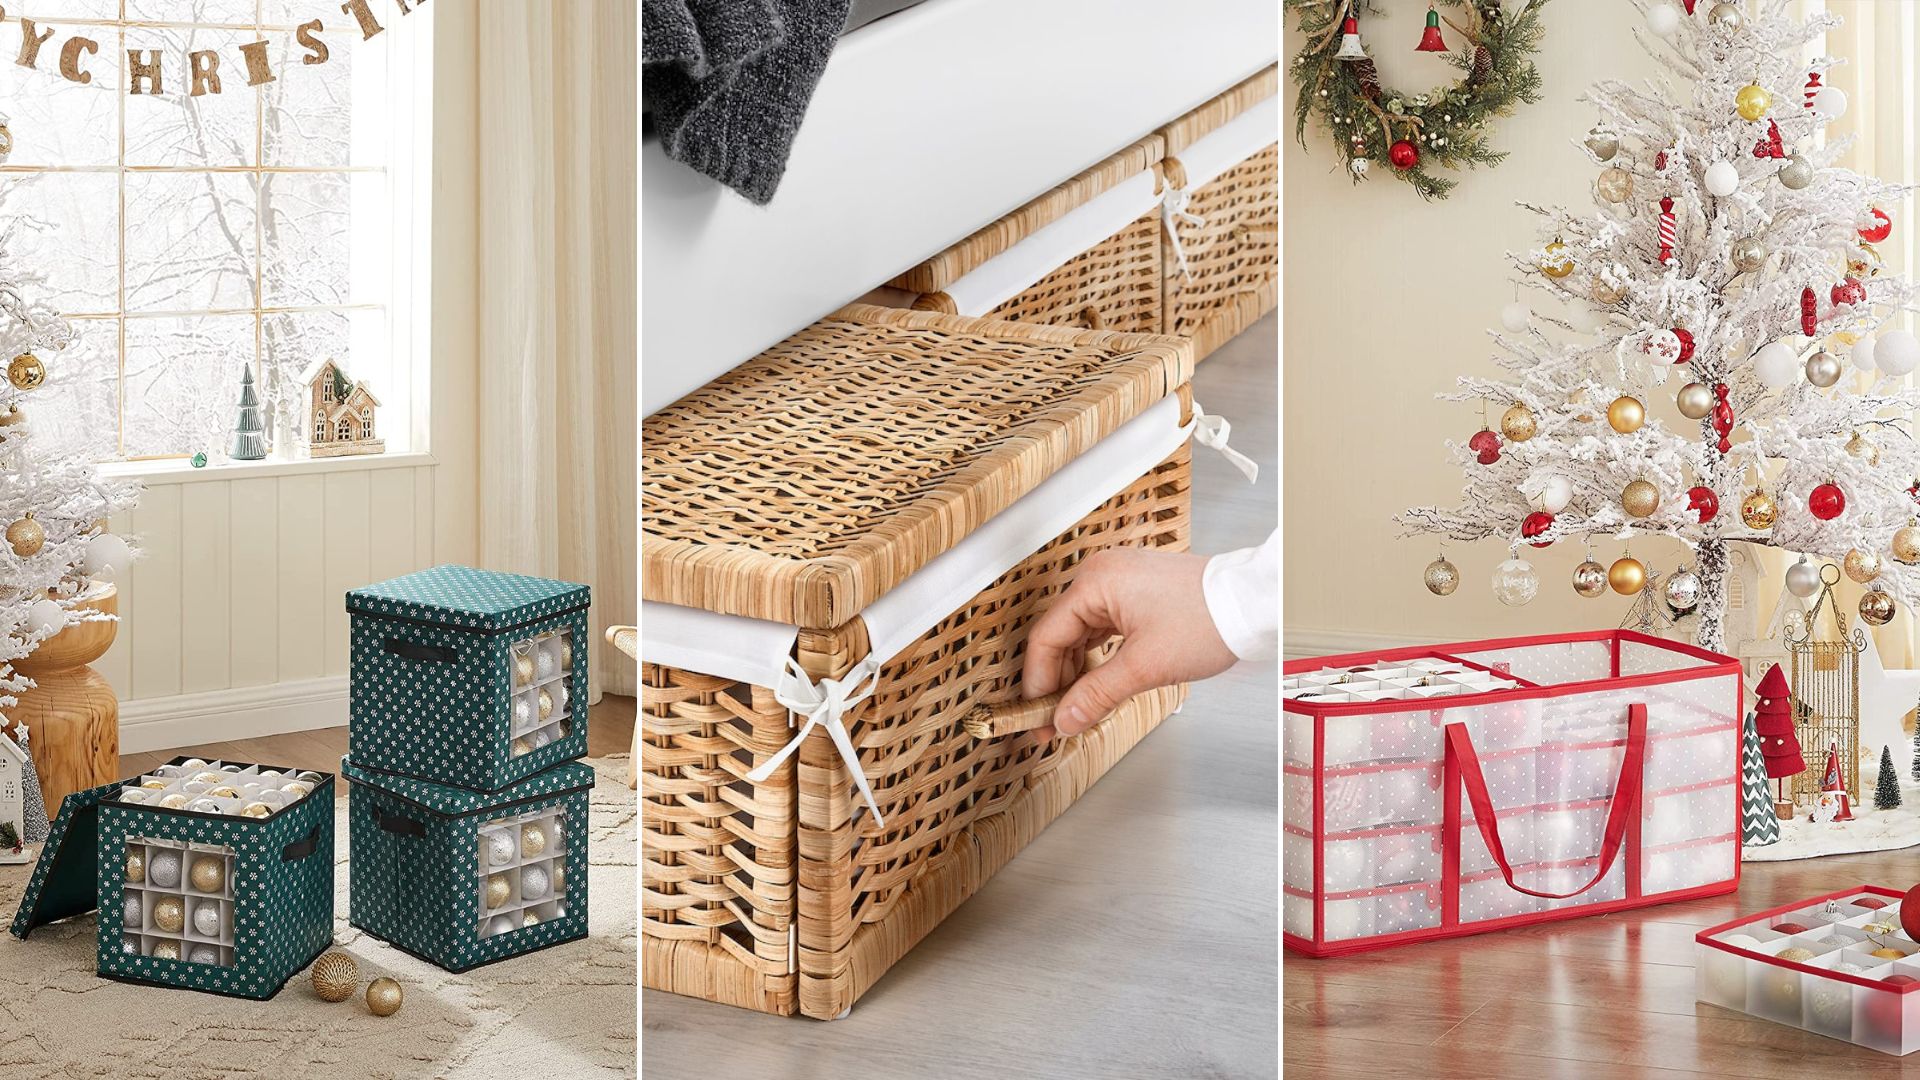 9 Christmas Trends That Will Be Huge in 2022  Christmas ornament storage,  Storing holiday decorations, Ornament storage